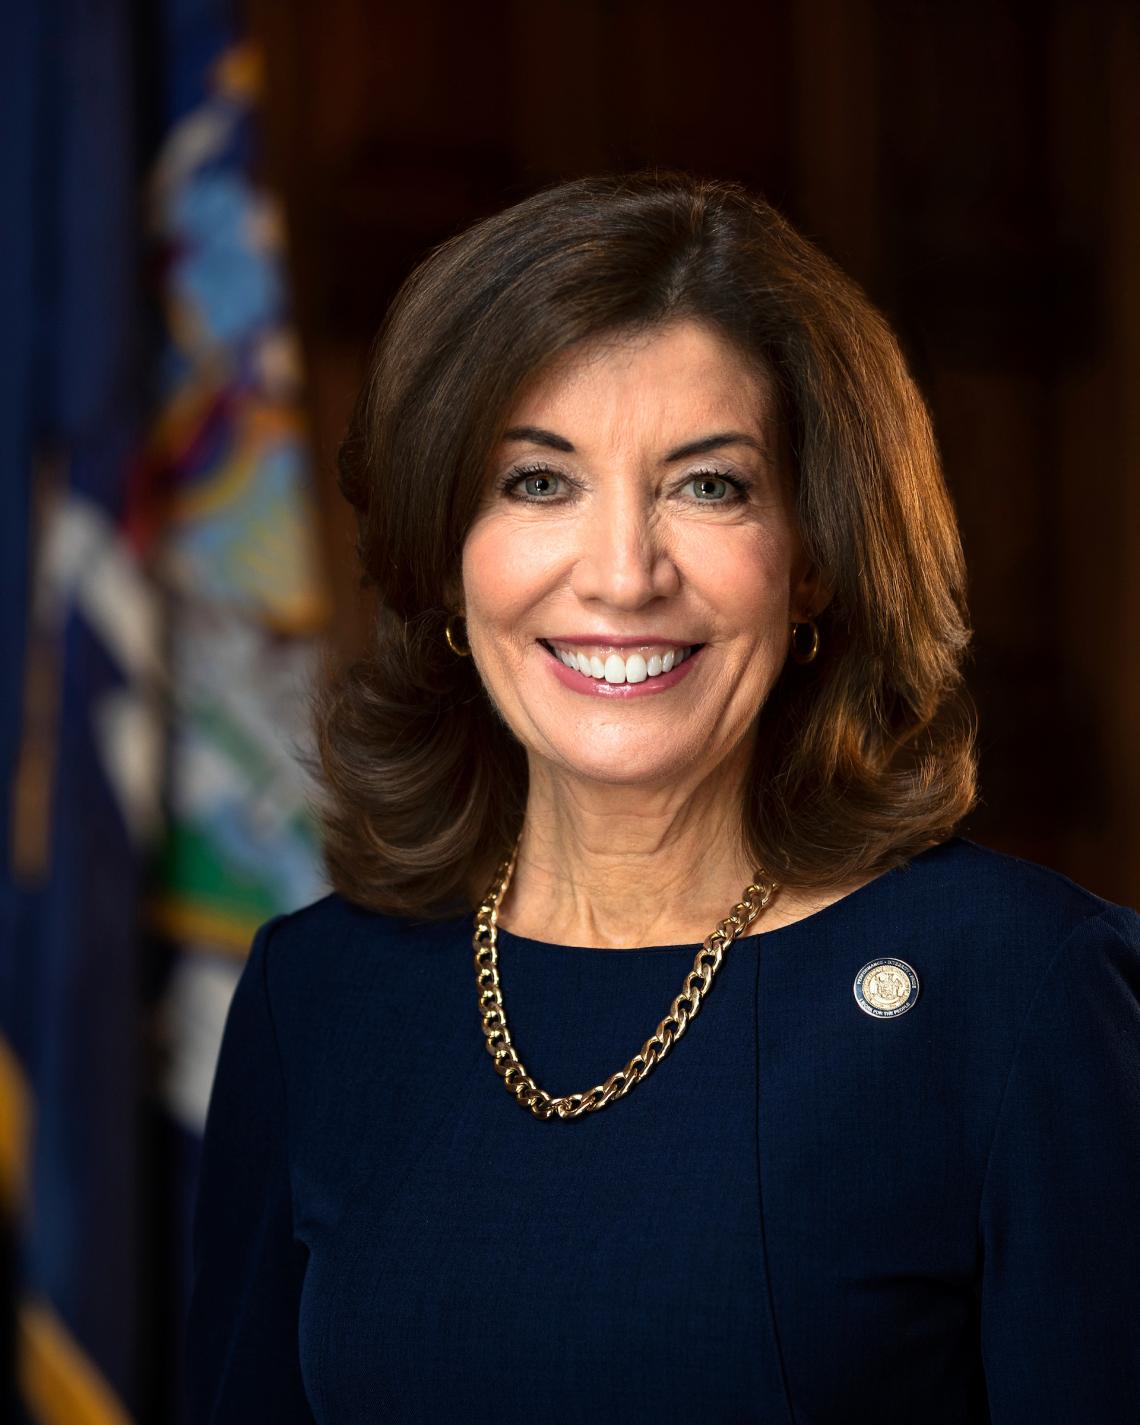 Lieutenant Governor Kathy Hochul New York State The Business Council